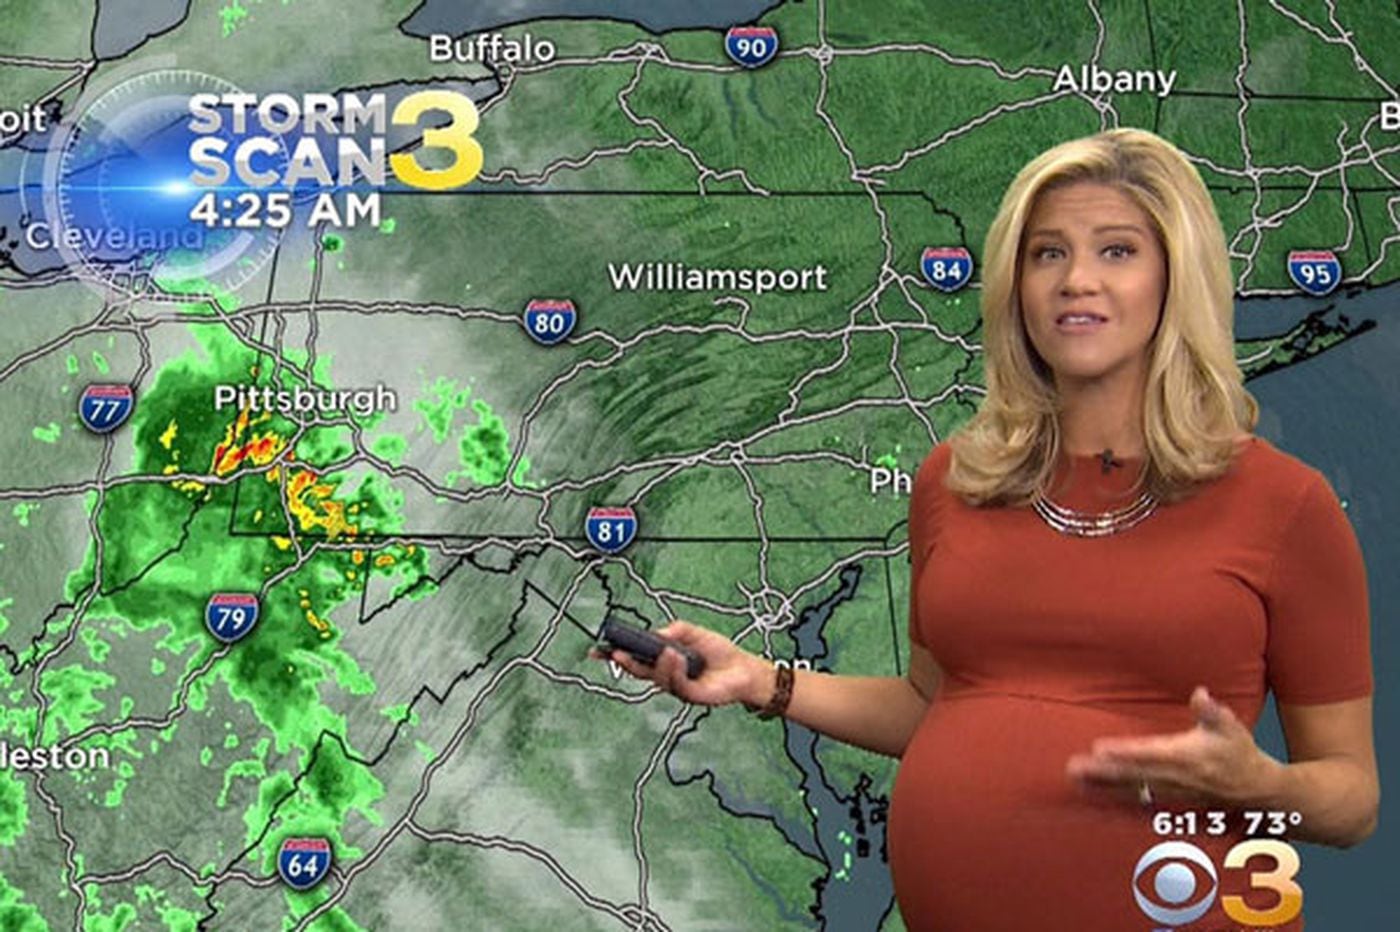 Cbs3 Meteorologist Speaks Out Against Haters Who Body Shame Her For Pregnancy